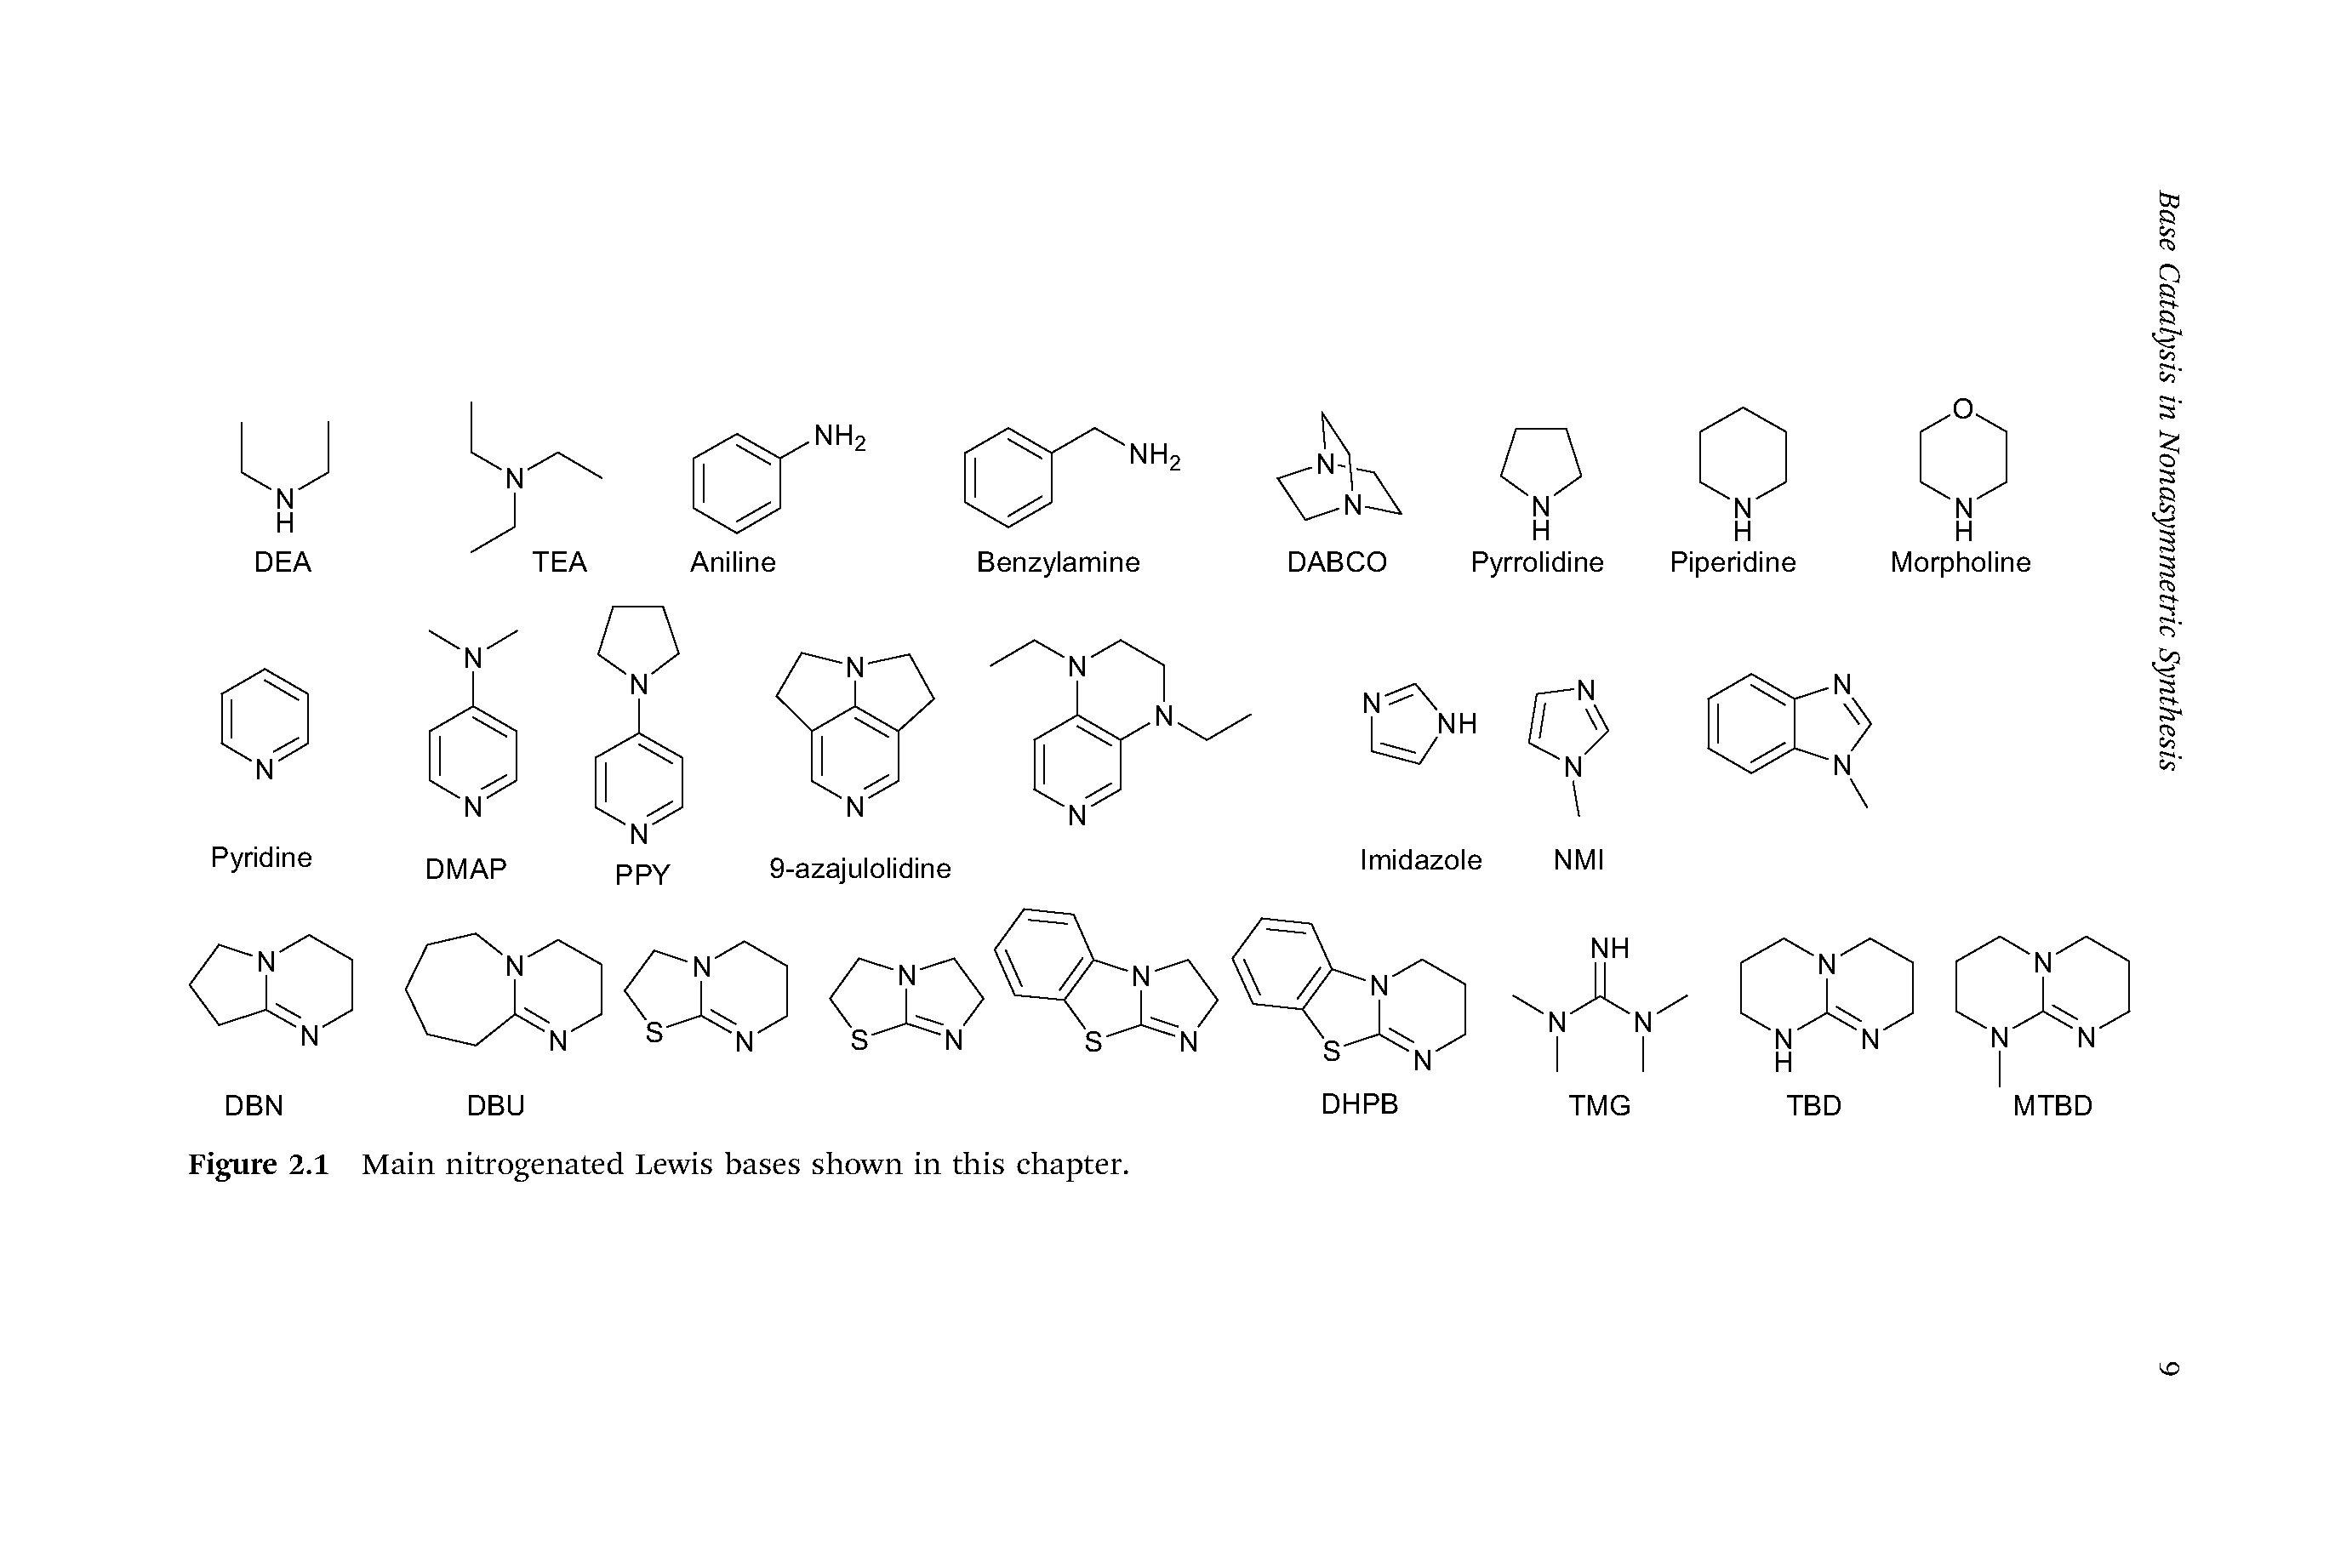 Figure 2.1 Main nitrogenated Lewis bases shown in this chapter.